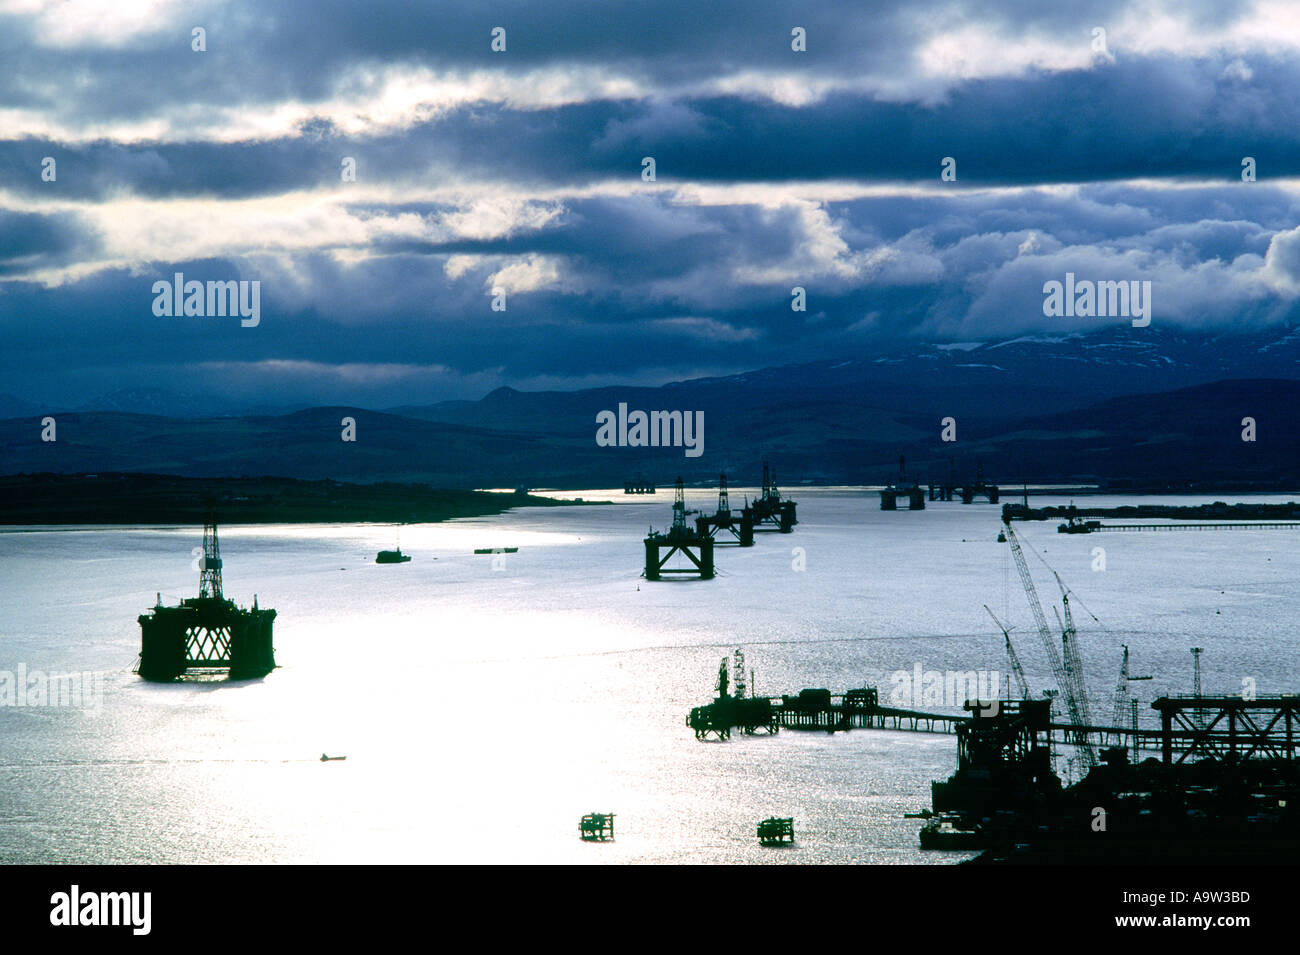 Drilling rigs platforms in safe haven of Cromarty Firth, Highland Region, Scotland at height of the North sea oil industry boom Stock Photo